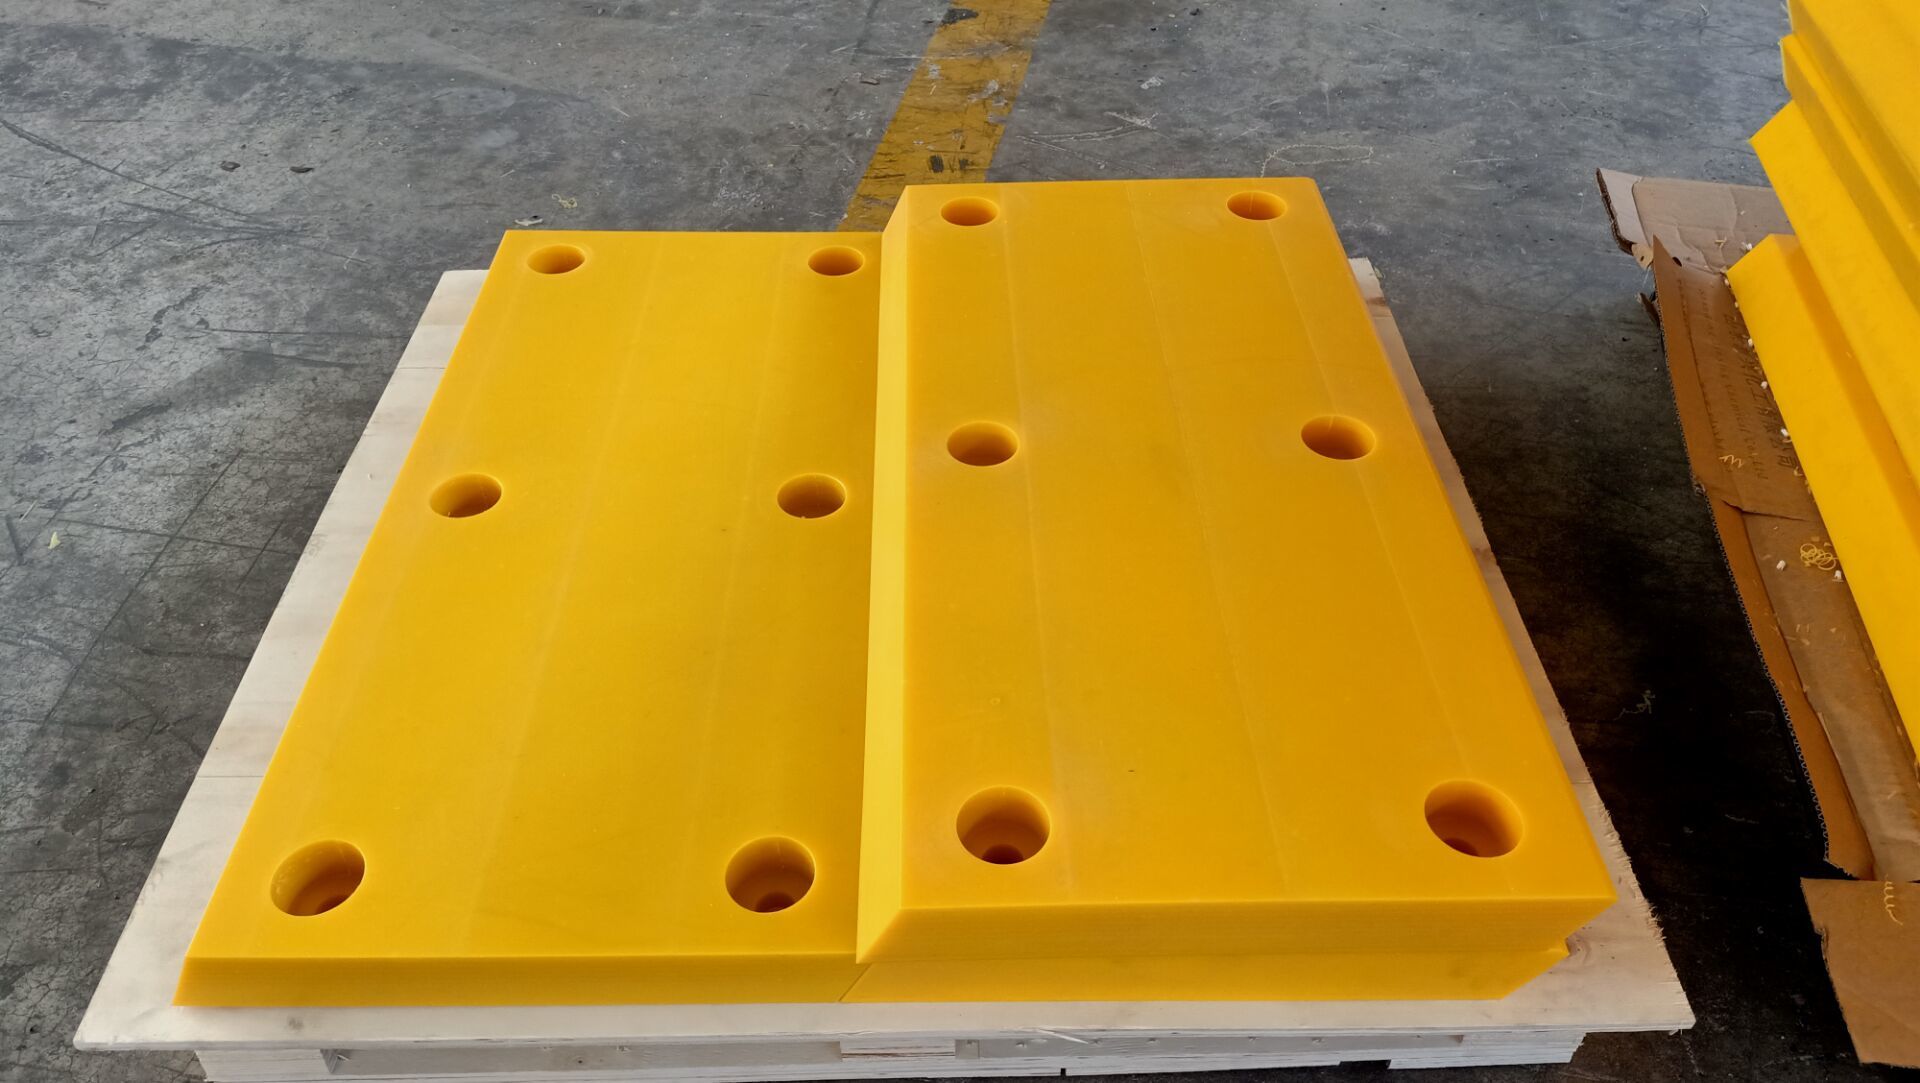 Marine fender sliding pads for the dock and ports